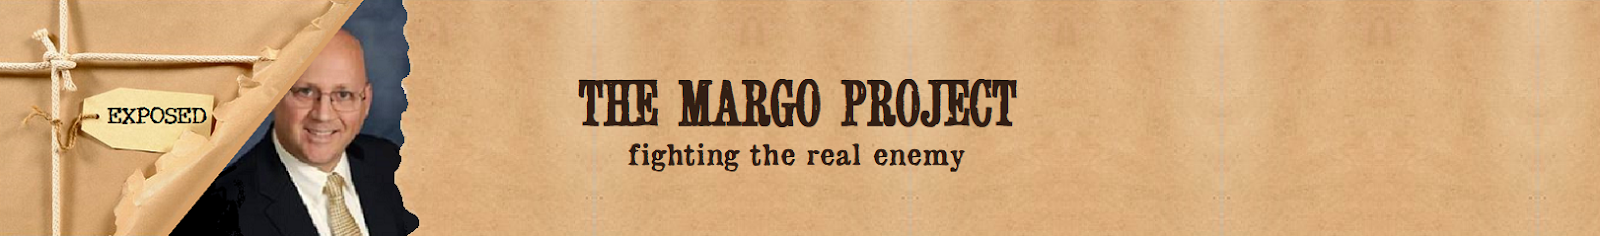 The Margo Project